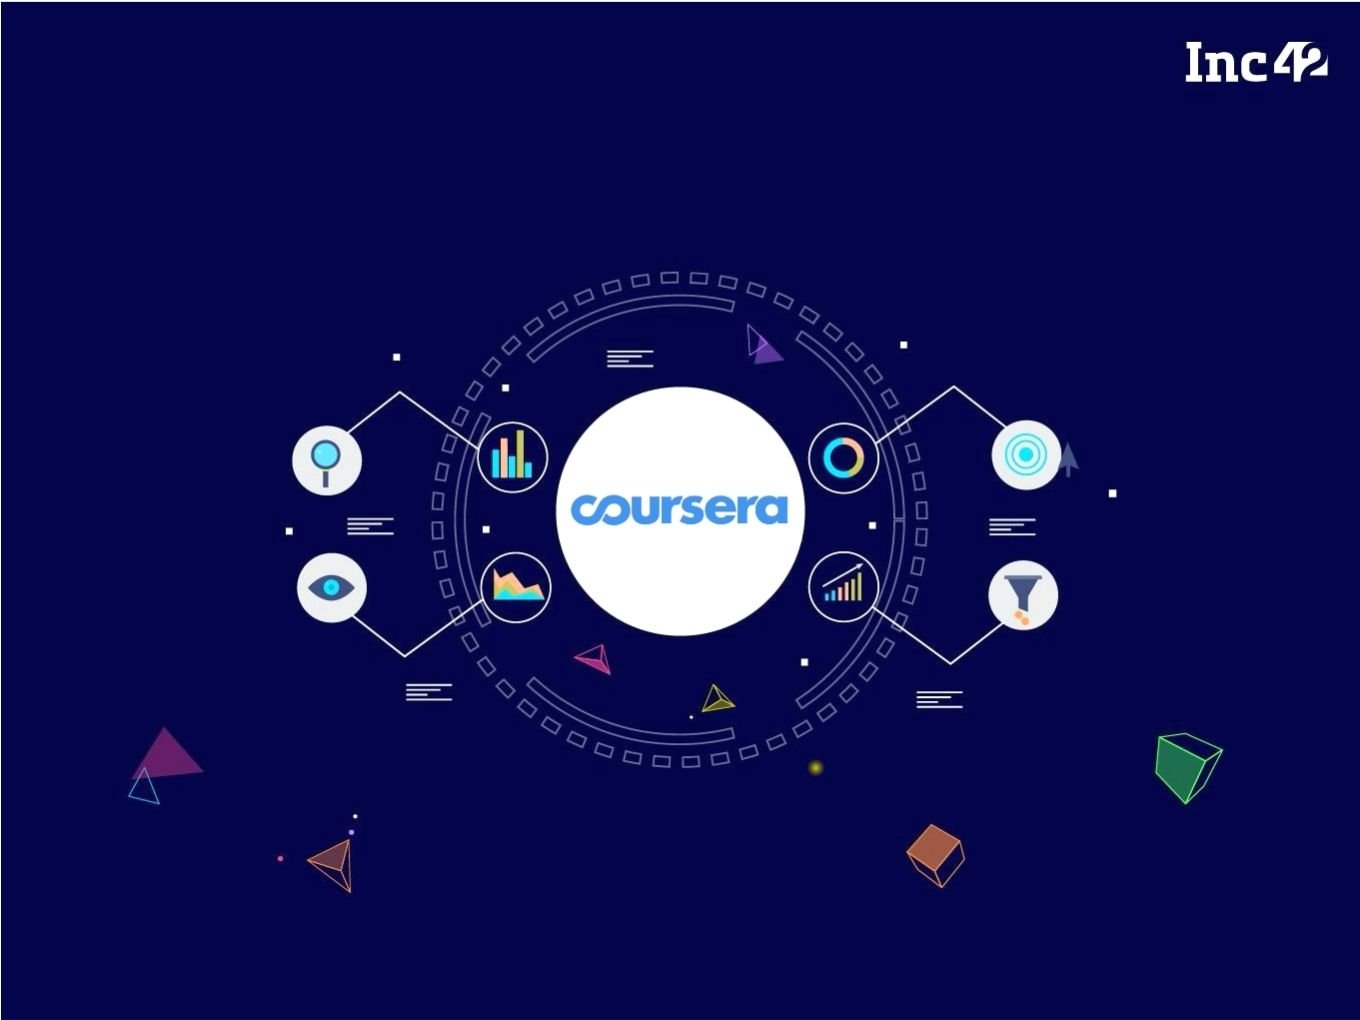 [What The Financials] Coursera India’s Profits Grow In FY20, Doubles Revenue To INR 20 Cr